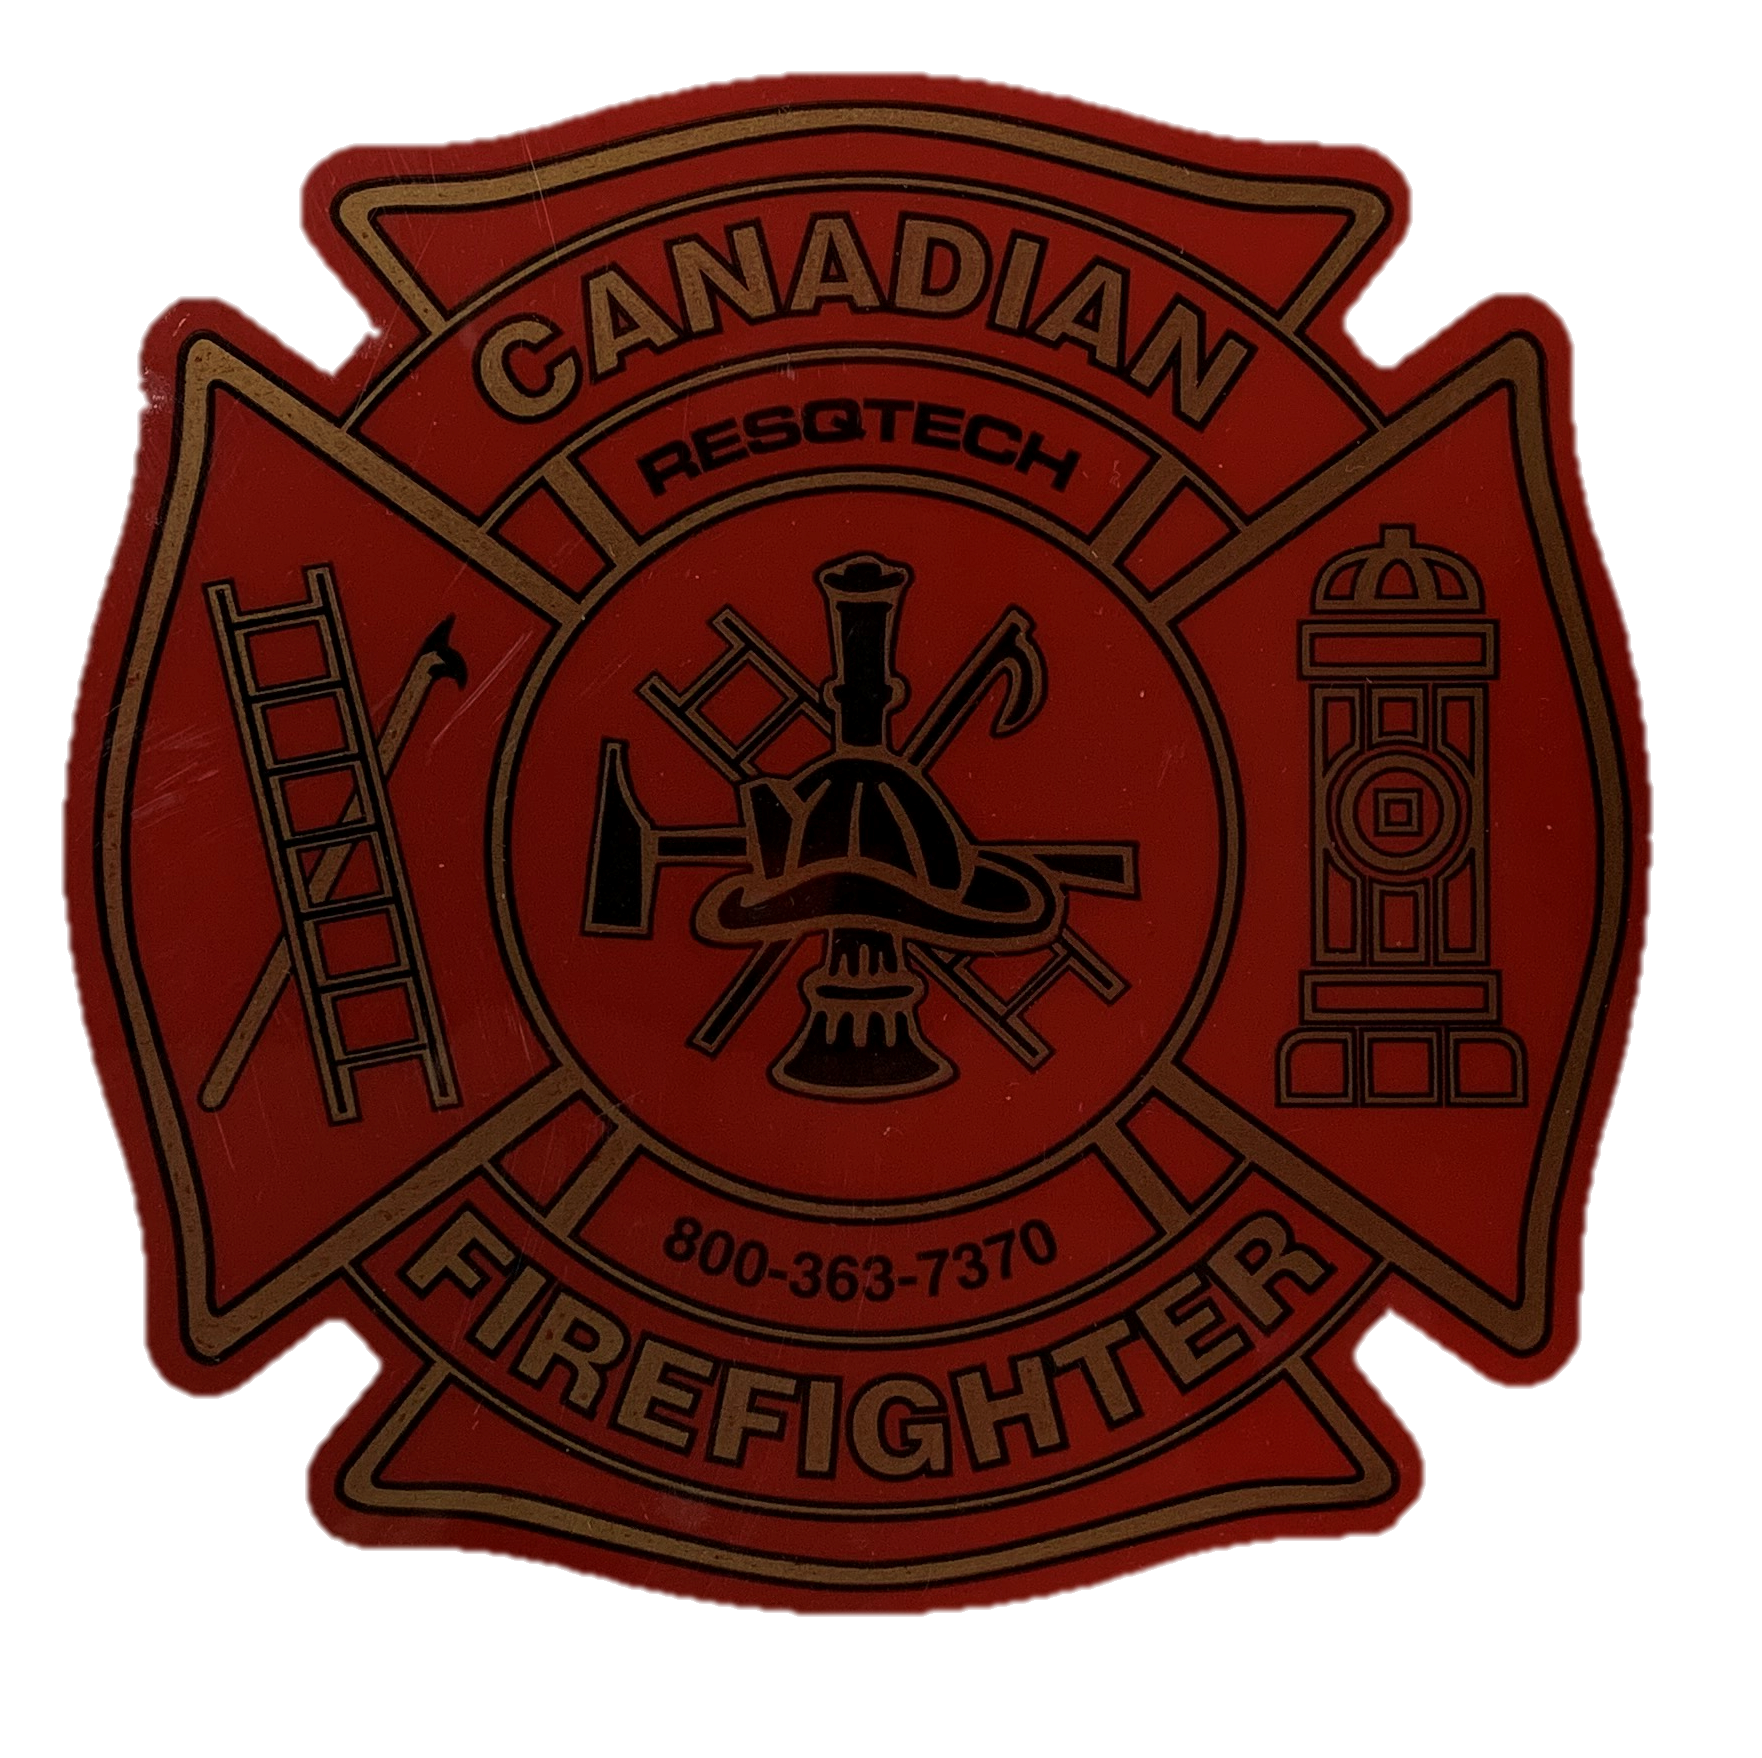 "Canadian Firefighter" Window Decal